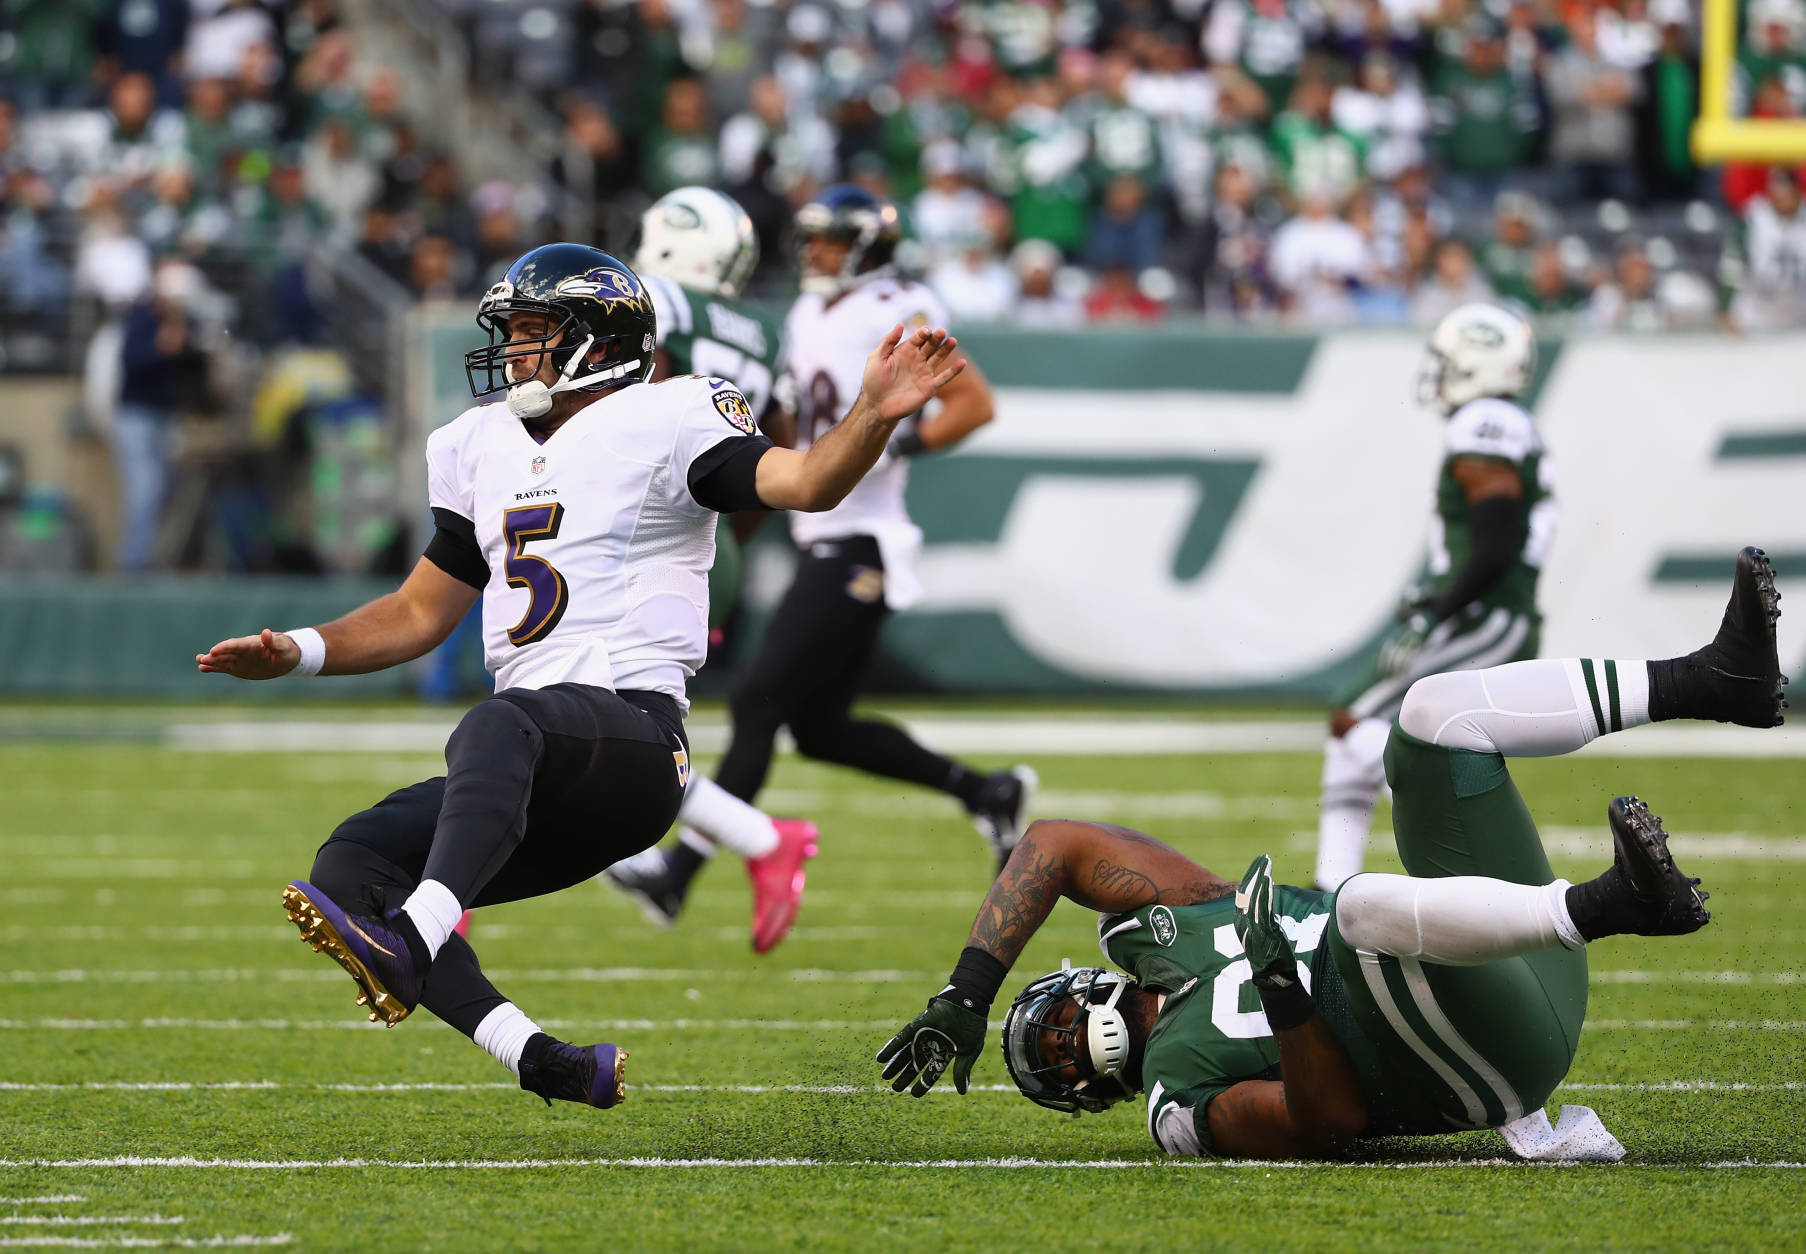 EAST RUTHERFORD, NJ - OCTOBER 23: Quarterback Joe Flacco #5 of the Baltimore Ravens is tackled by Sheldon Richardson #91 of the New York Jets in teh fourth quarter at MetLife Stadium on October 23, 2016 in East Rutherford, New Jersey. The New York Jets won 24-16. (Photo by Al Bello/Getty Images)